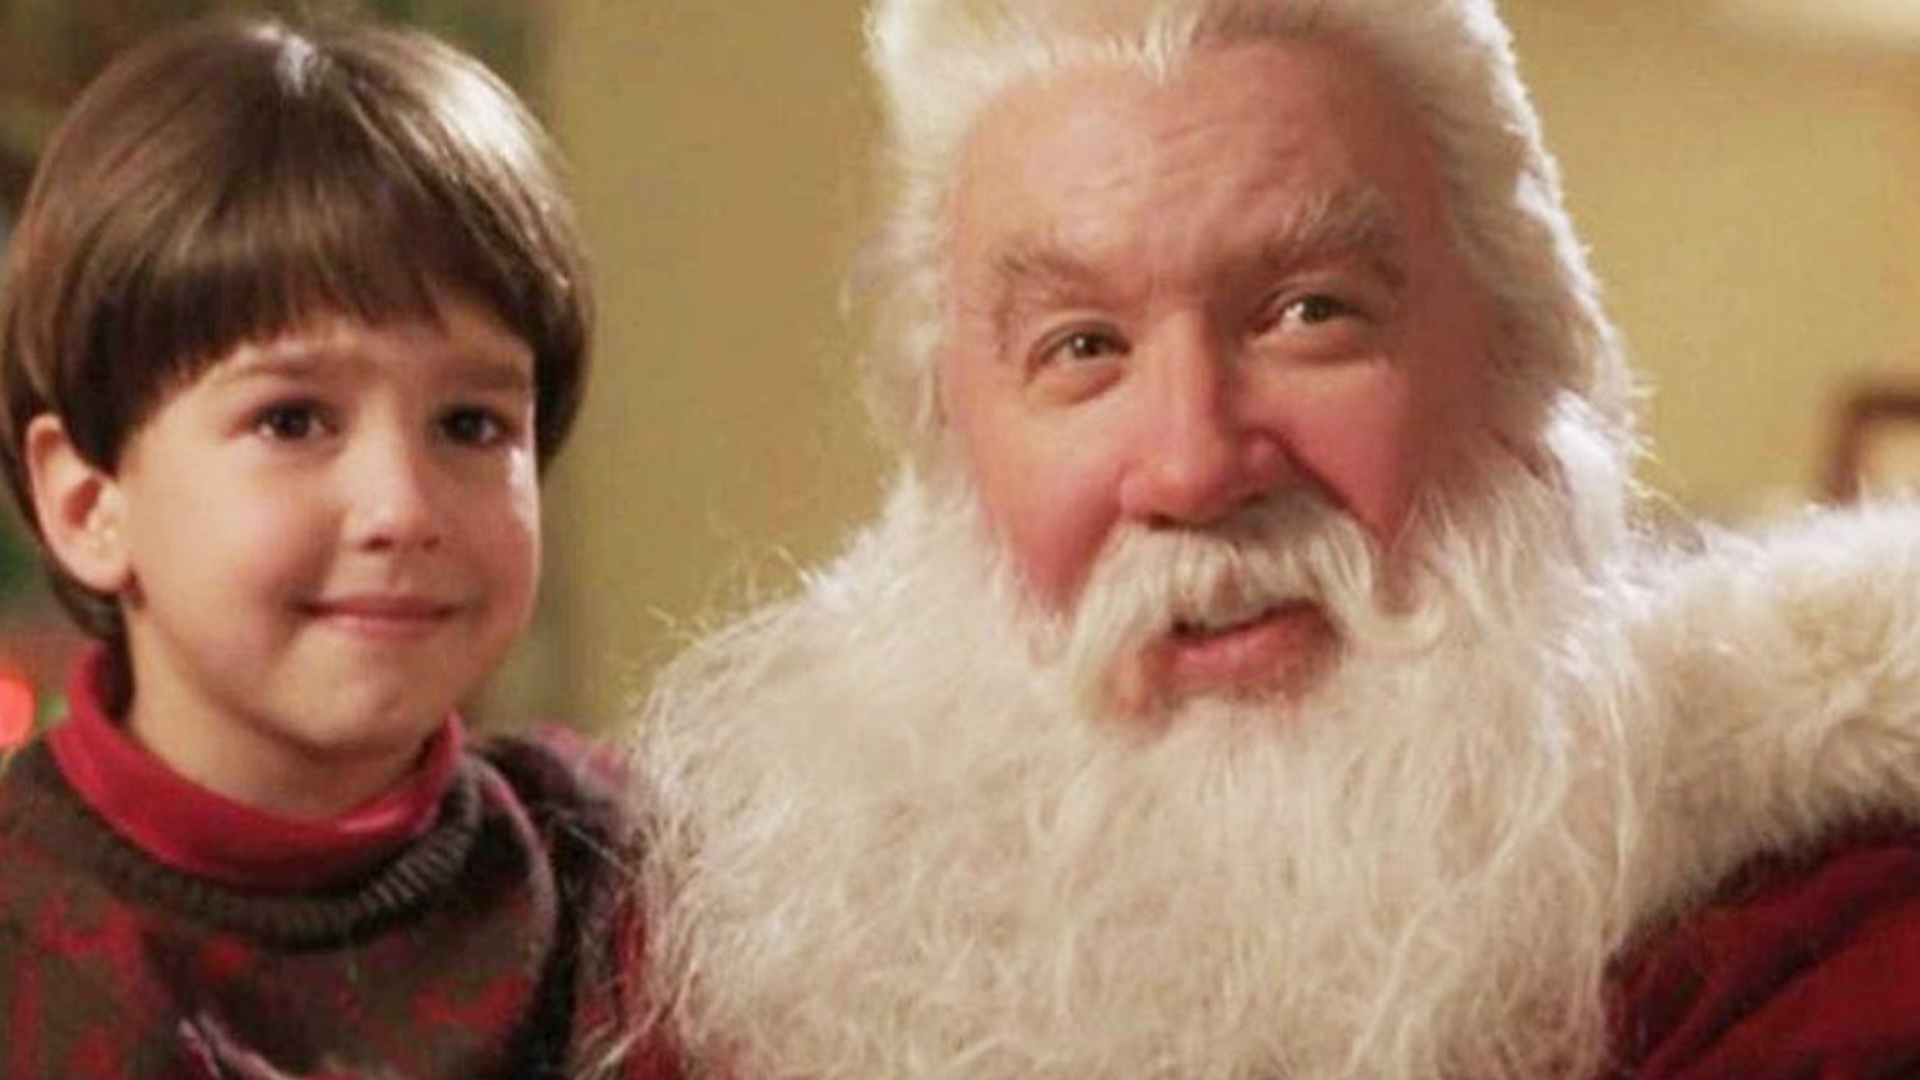 Scene from The Santa Clause 